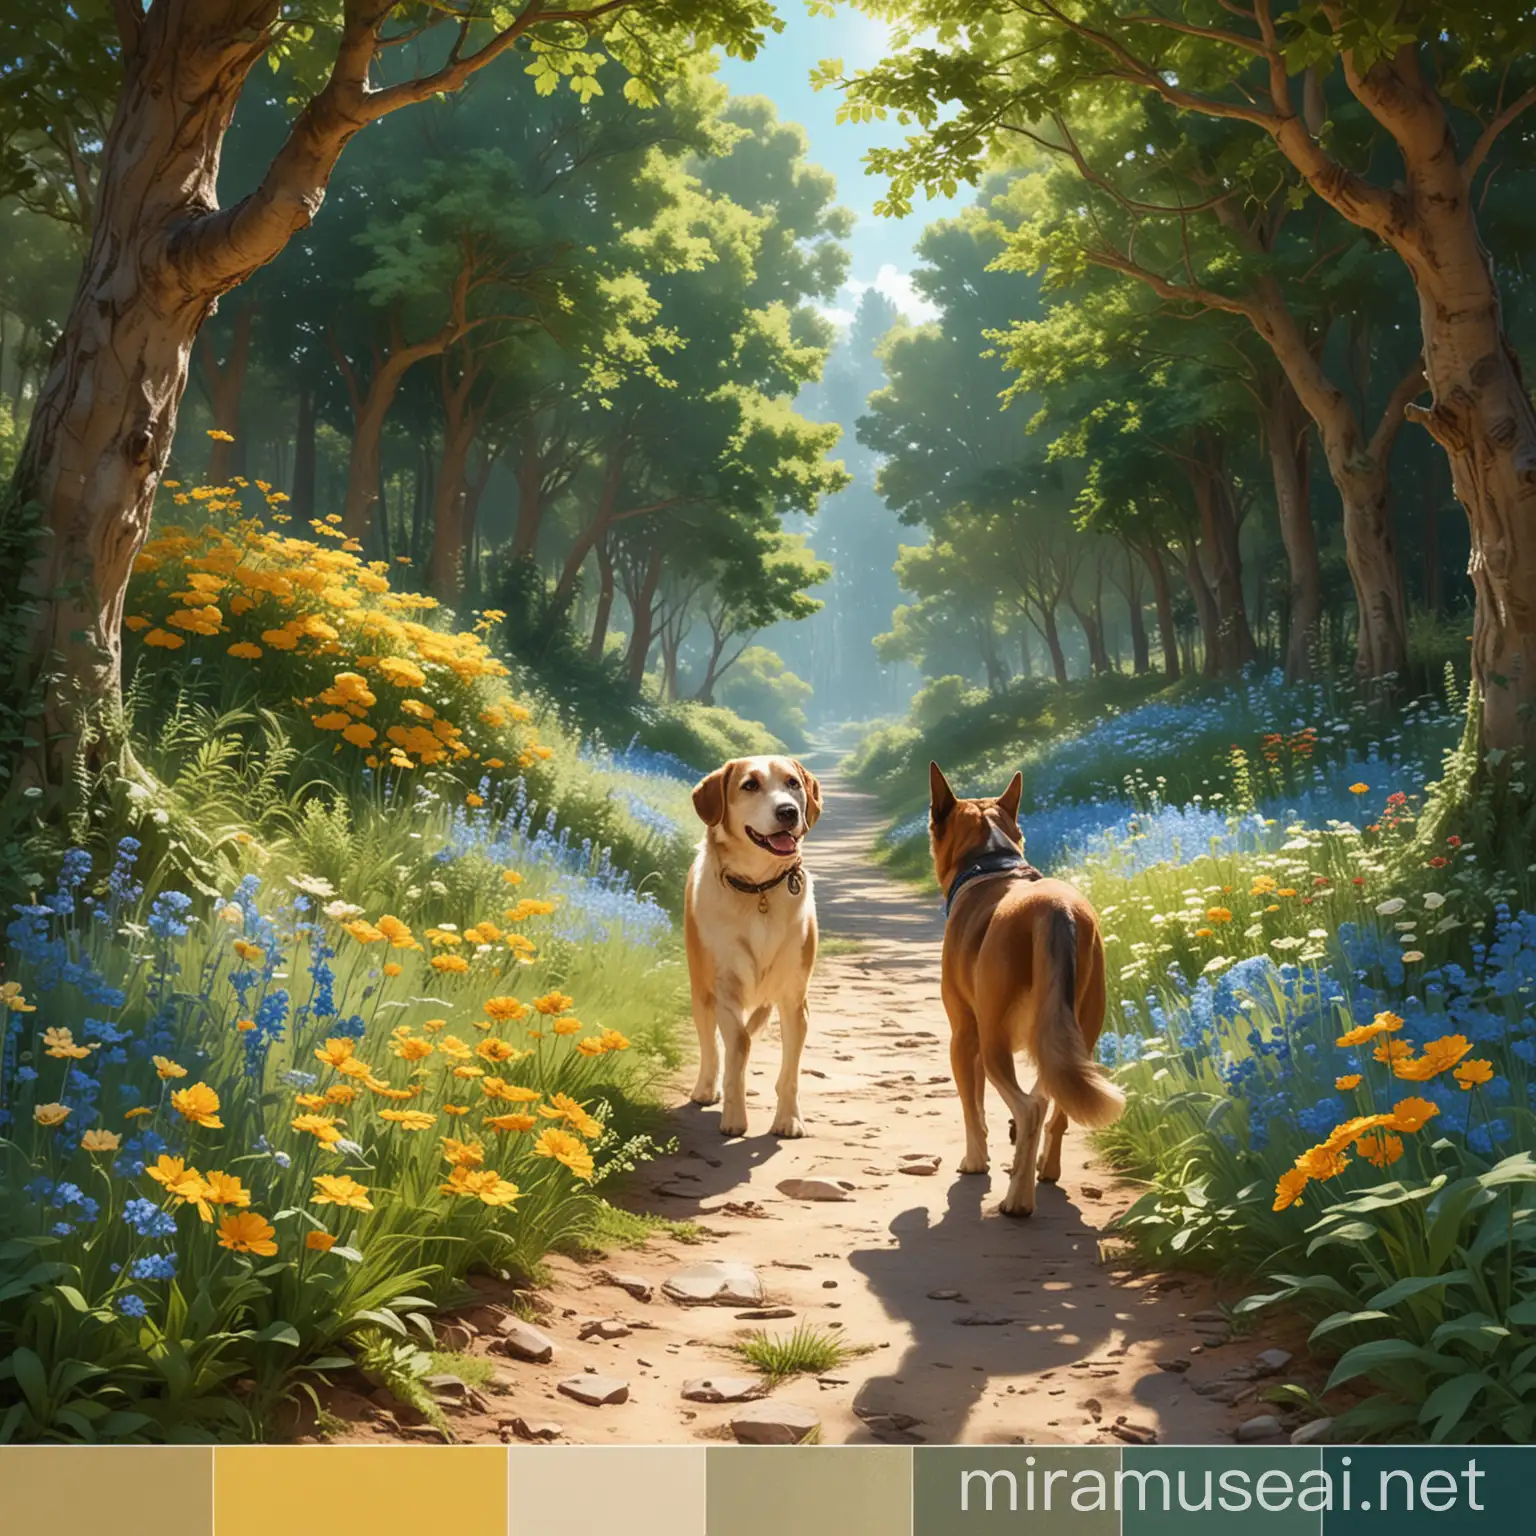 **Prompt for Designer:**
- **Background**: Create a background with lush trees and vibrant flowers, under a bright blue sky with sunlight filtering through.
- **Characters**: Design a young boy and a loyal guard dog walking together on the natural path. Show their companionship and the bond between them.
- **Colors**: Use warm and inviting colors to create a welcoming and peaceful atmosphere.
- **Style**: Keep the style surreal and captivating, with attention to detail to make the scene come alive.
- **Message**: Ensure the design conveys the message of companionship, environmental conservation, and the importance of protecting animals.Here's a color palette for your environmental conservation-themed design:

- Sky Blue: #87CEEB
- Sunlight Yellow: #FFFF00
- Lush Green for Trees: #2E8B57
- Vibrant Flowers: #FF69B4
- Boy's Clothing: Earthy Brown: #8B4513
- Dog's Fur: Warm Tan: #D2B48C
- Pathway: Sandy Beige: #F5DEB3
- Highlights: Bright White: #FFFFFF
- Shadows: Deep Green: #006400

This palette should help convey warmth, vibrancy, and a sense of connection with nature.Digital Painting:
Surreal Environmentally Friendly:
Portrait Painting: